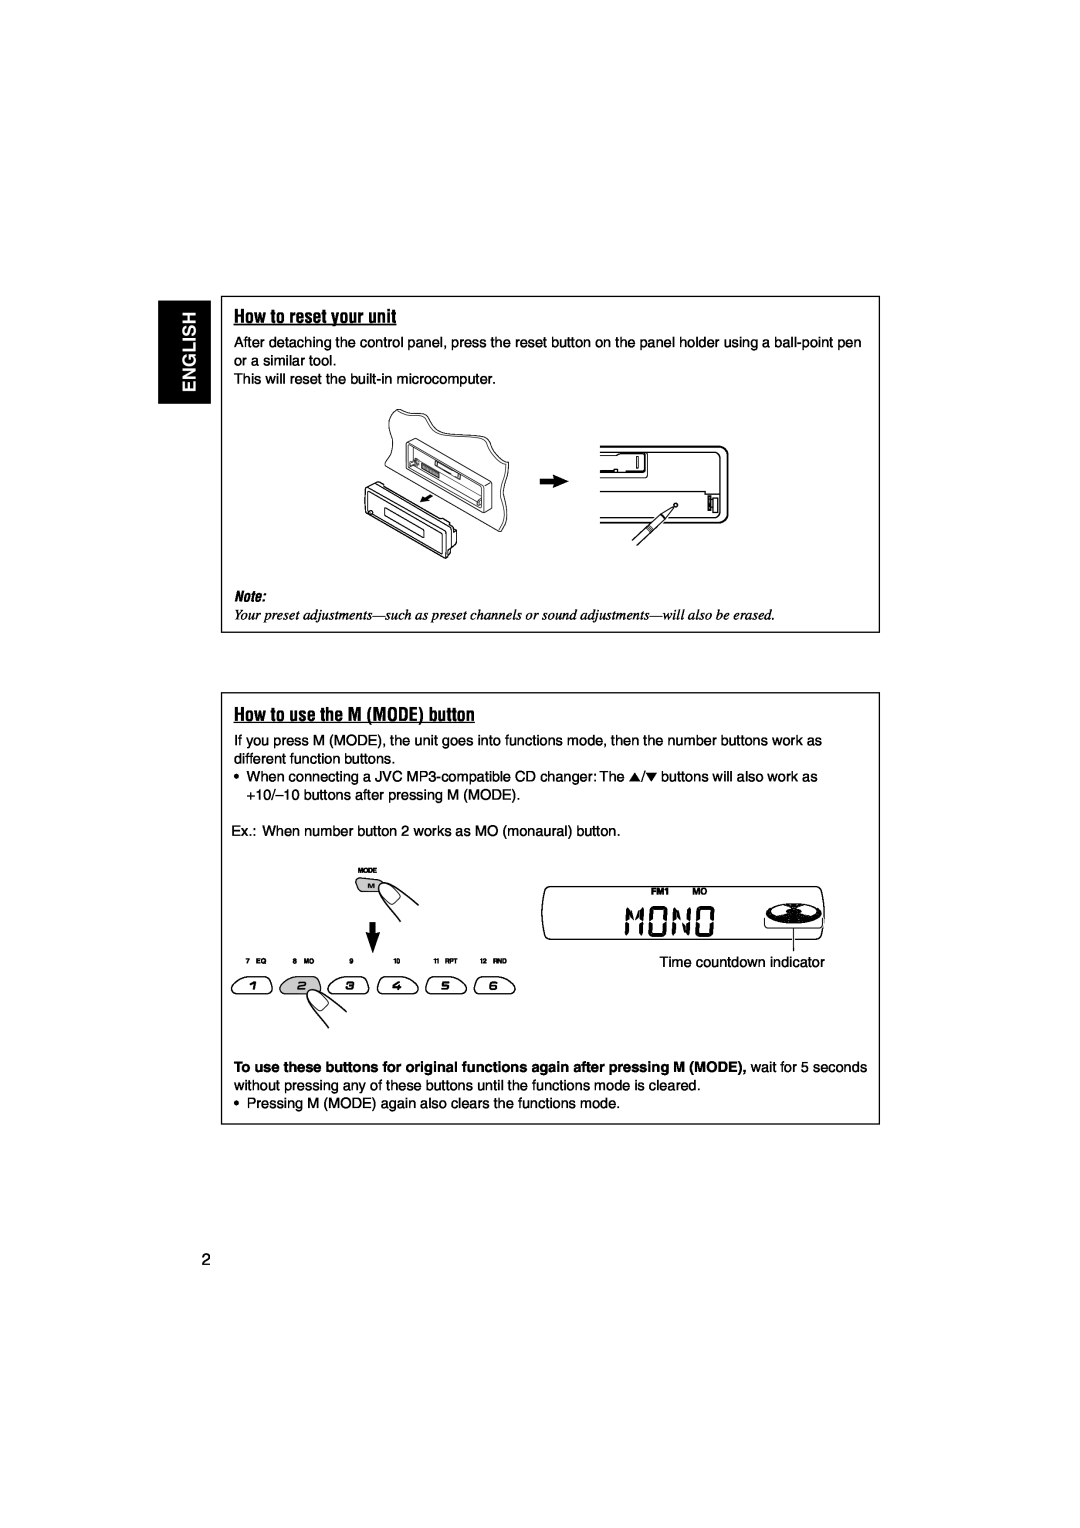 JVC GET0140-001A, KS-FX842R manual English, How to reset your unit, How to use the M MODE button 